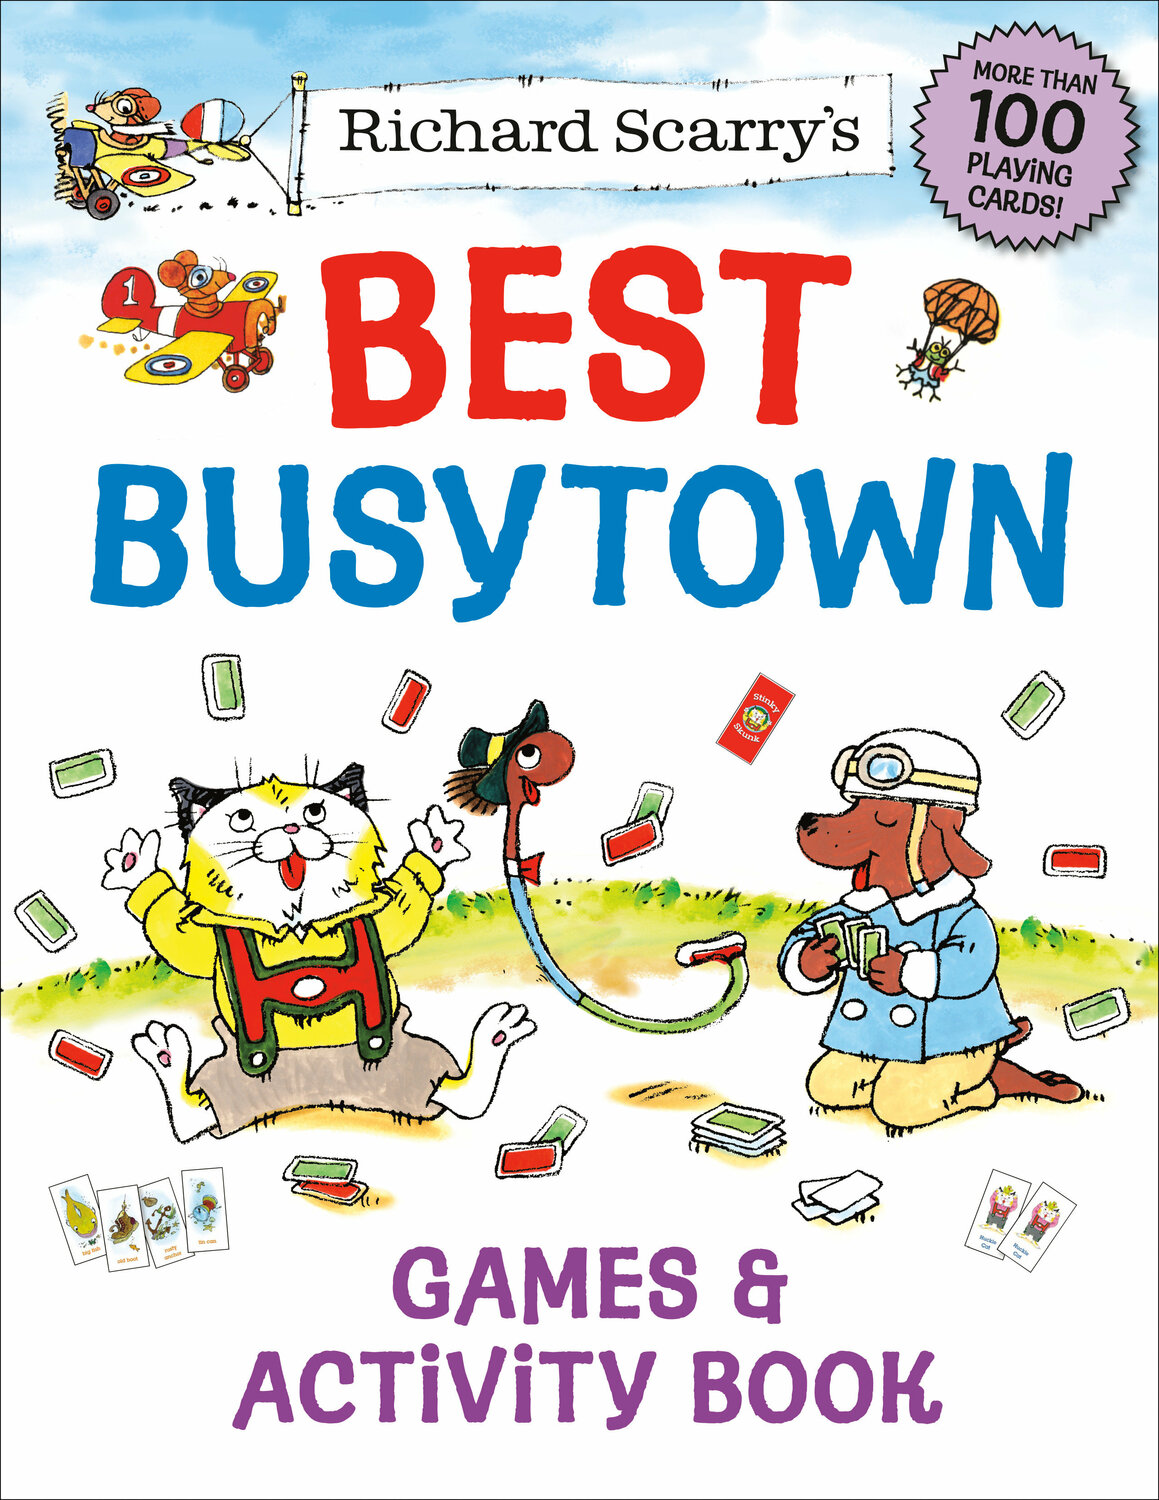 Richard Scarry's Best Busy Year Ever a book by Richard Scarry.